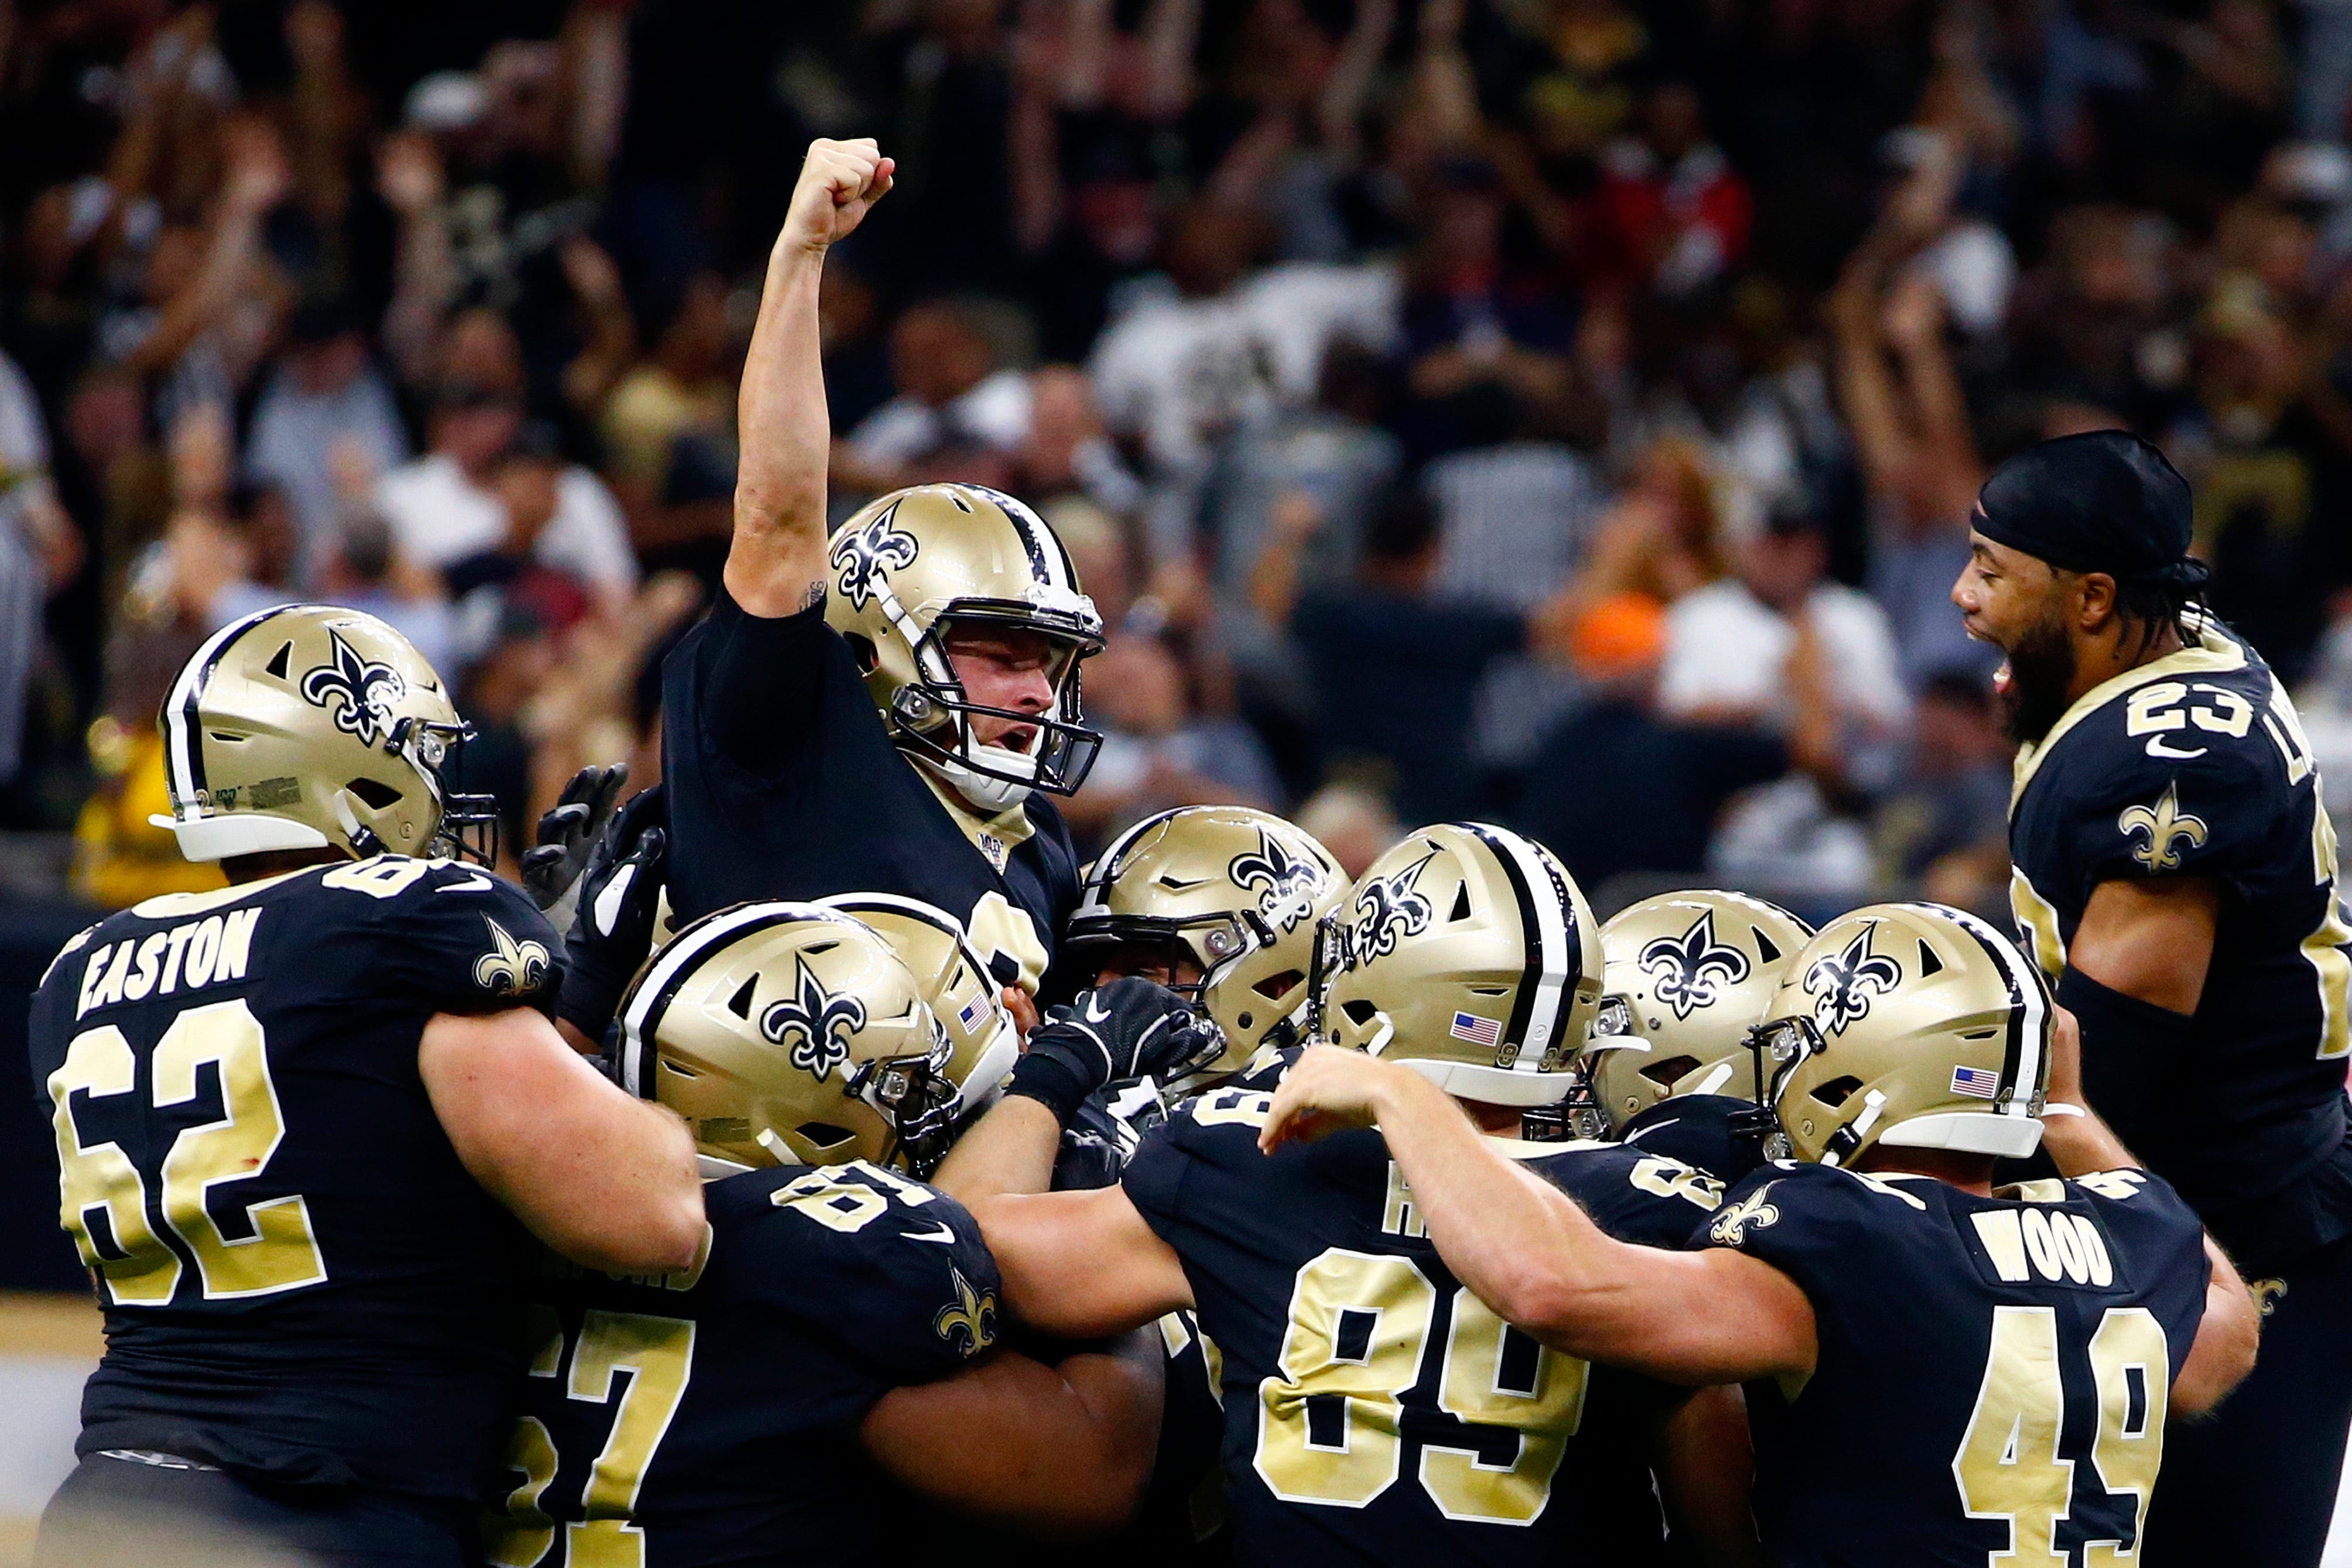 Saints beat Texans on Wil Lutz's field goal at the buzzer in wild finish at Superdome